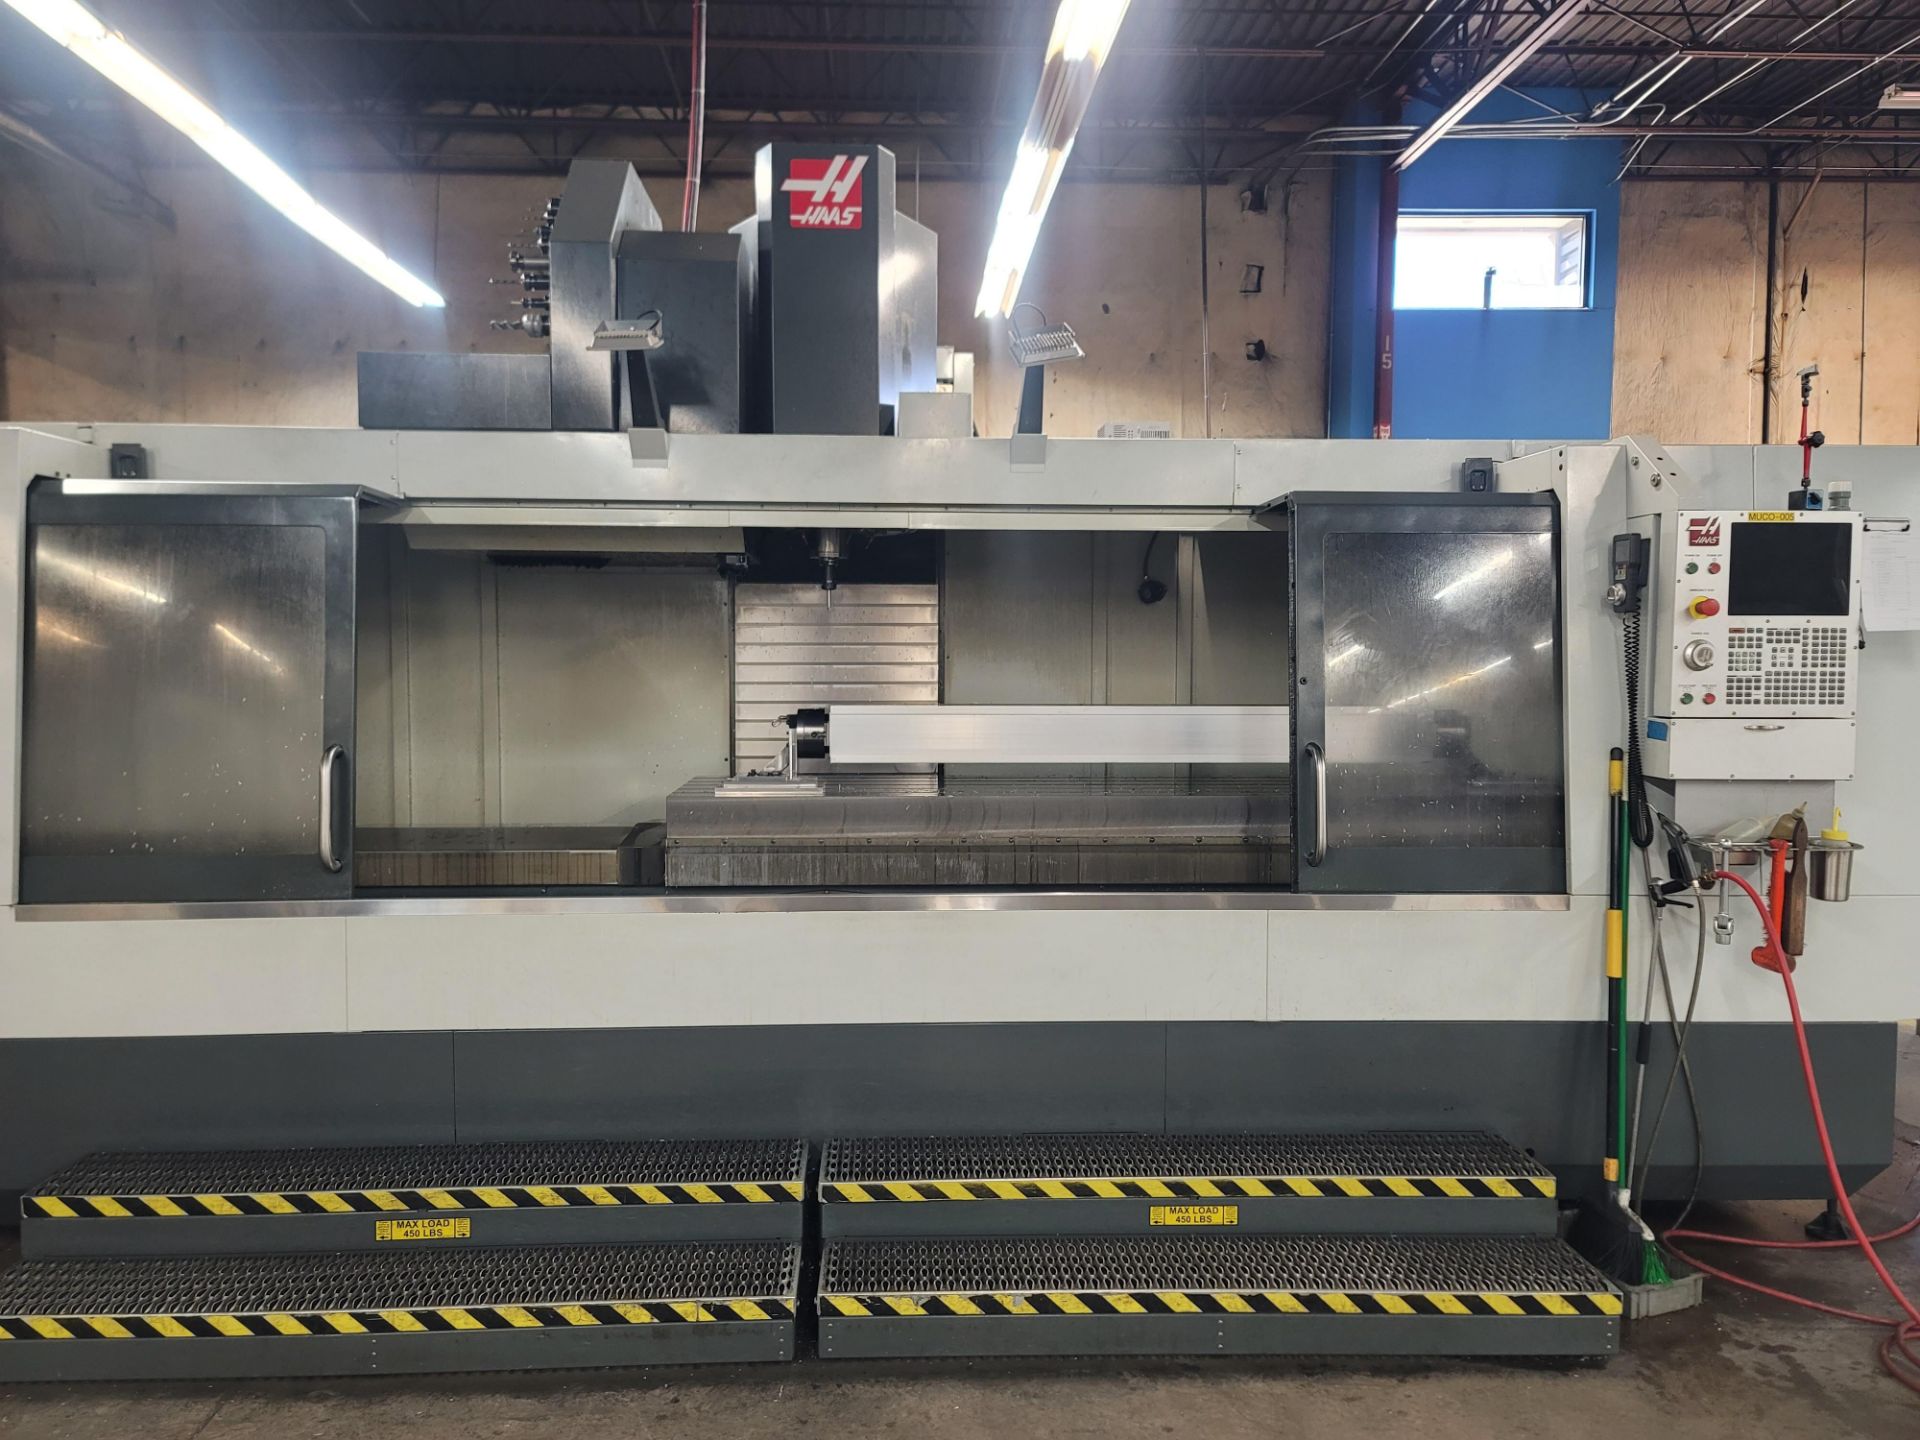 2021 HAAS VF-12/40 VERTICAL MACHINING CENTER, XYZ TRAVELS: 150" X 32" X 30", 150" X 28" TABLE, - Image 7 of 27